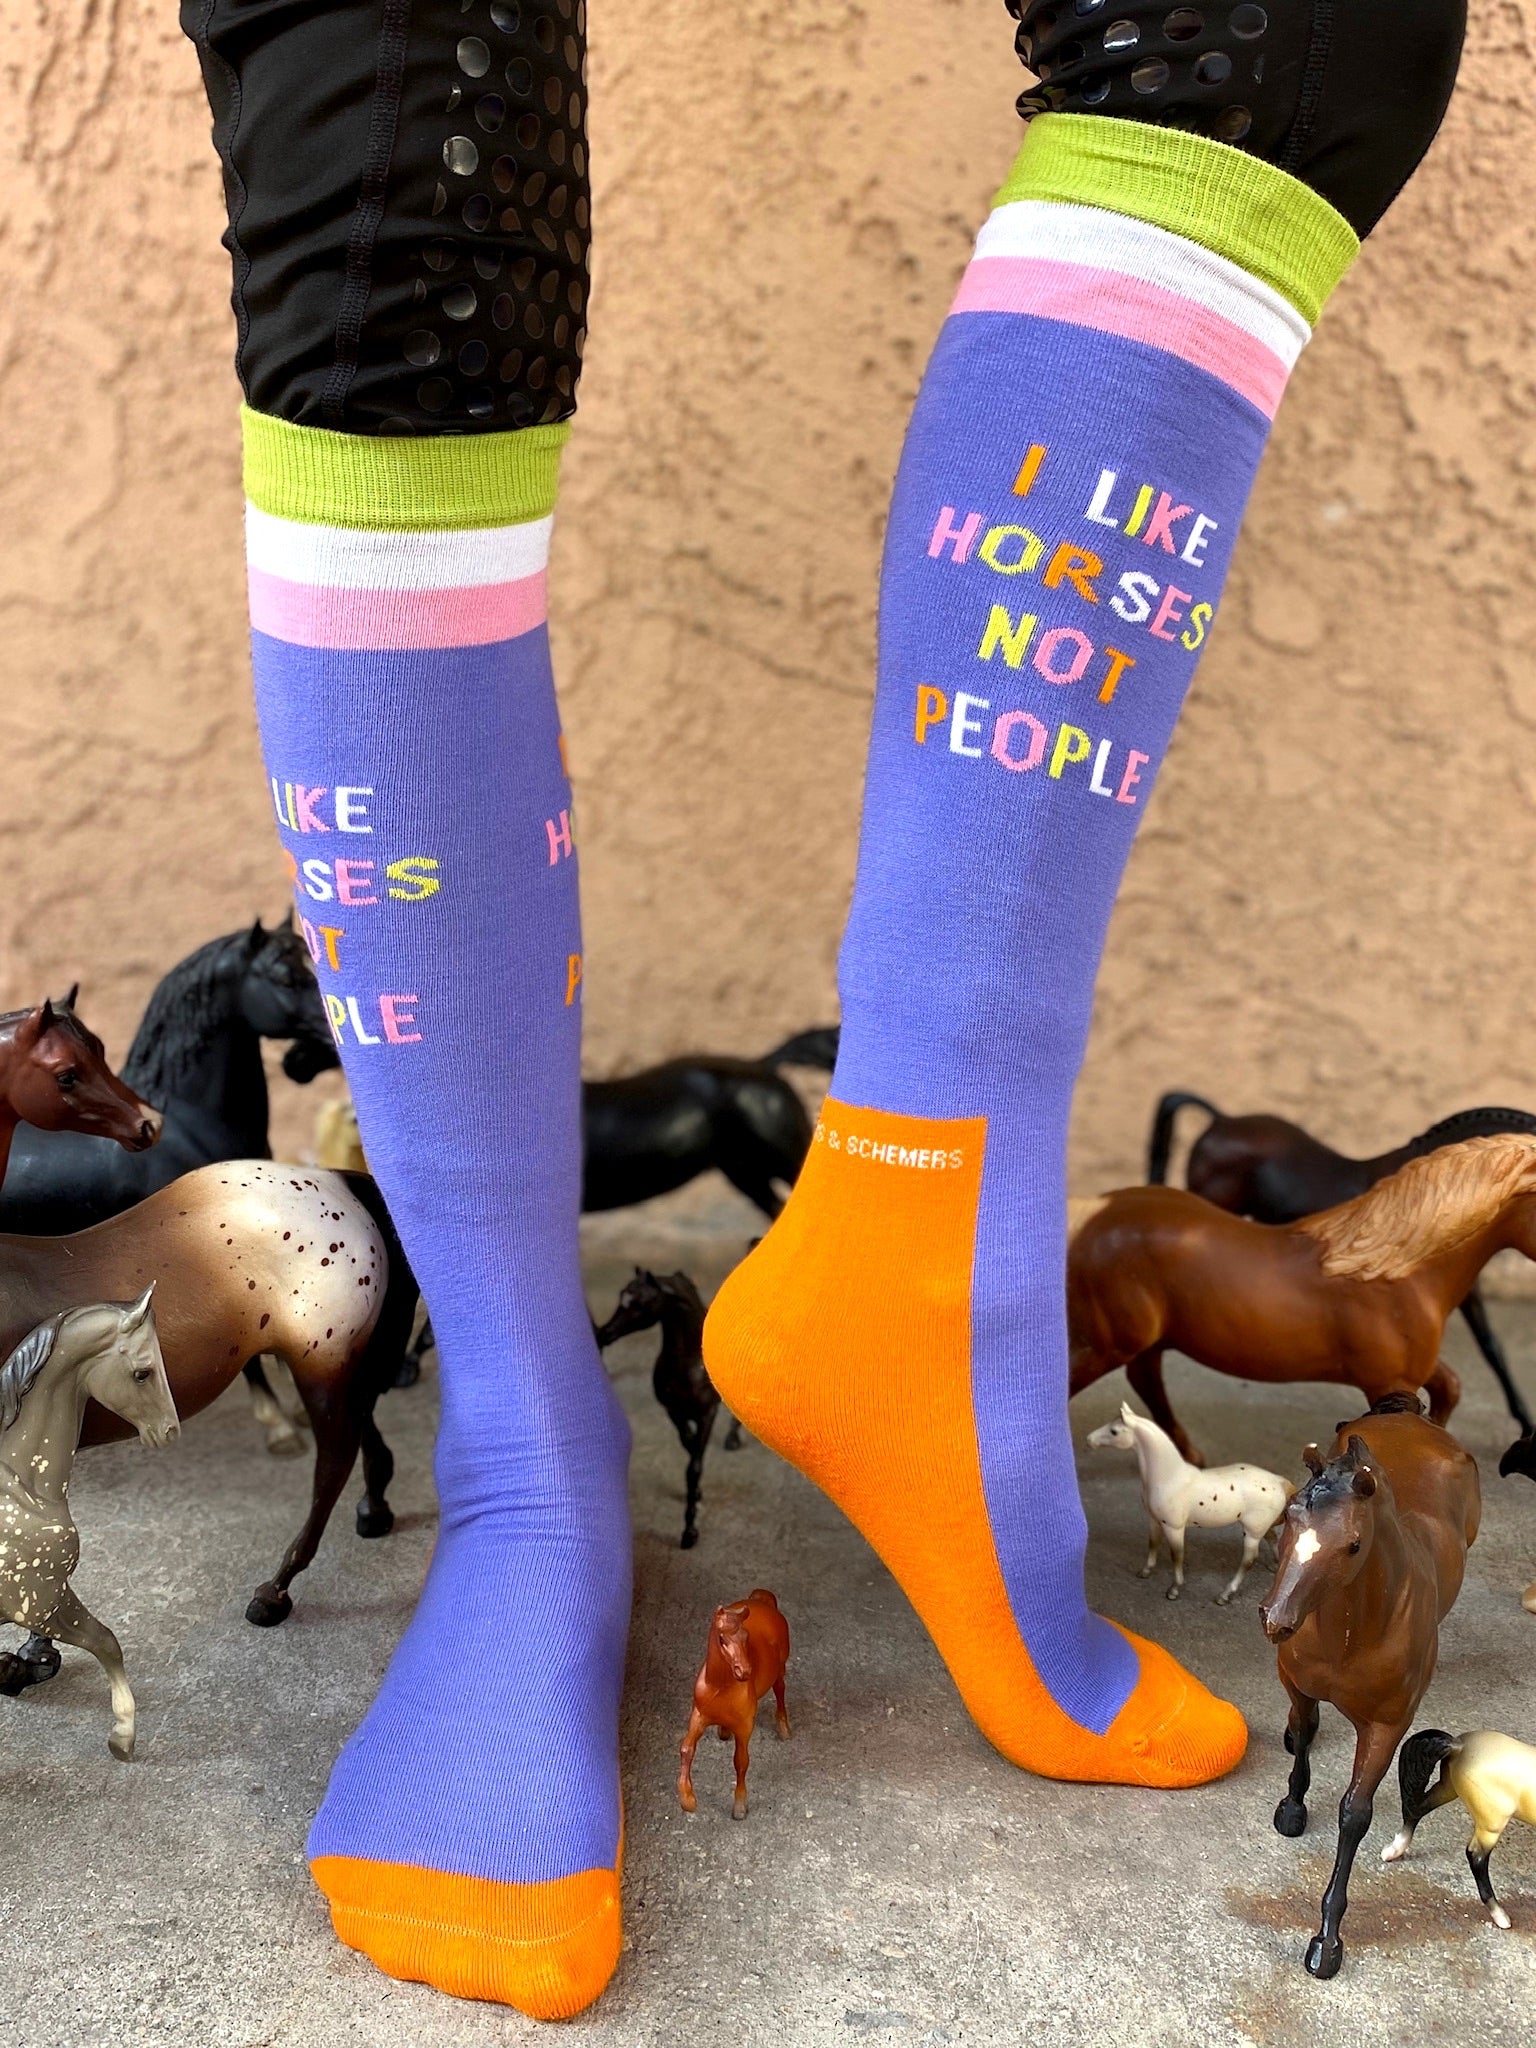 I Like Horses Not People - Dreamers and Schemers Socks